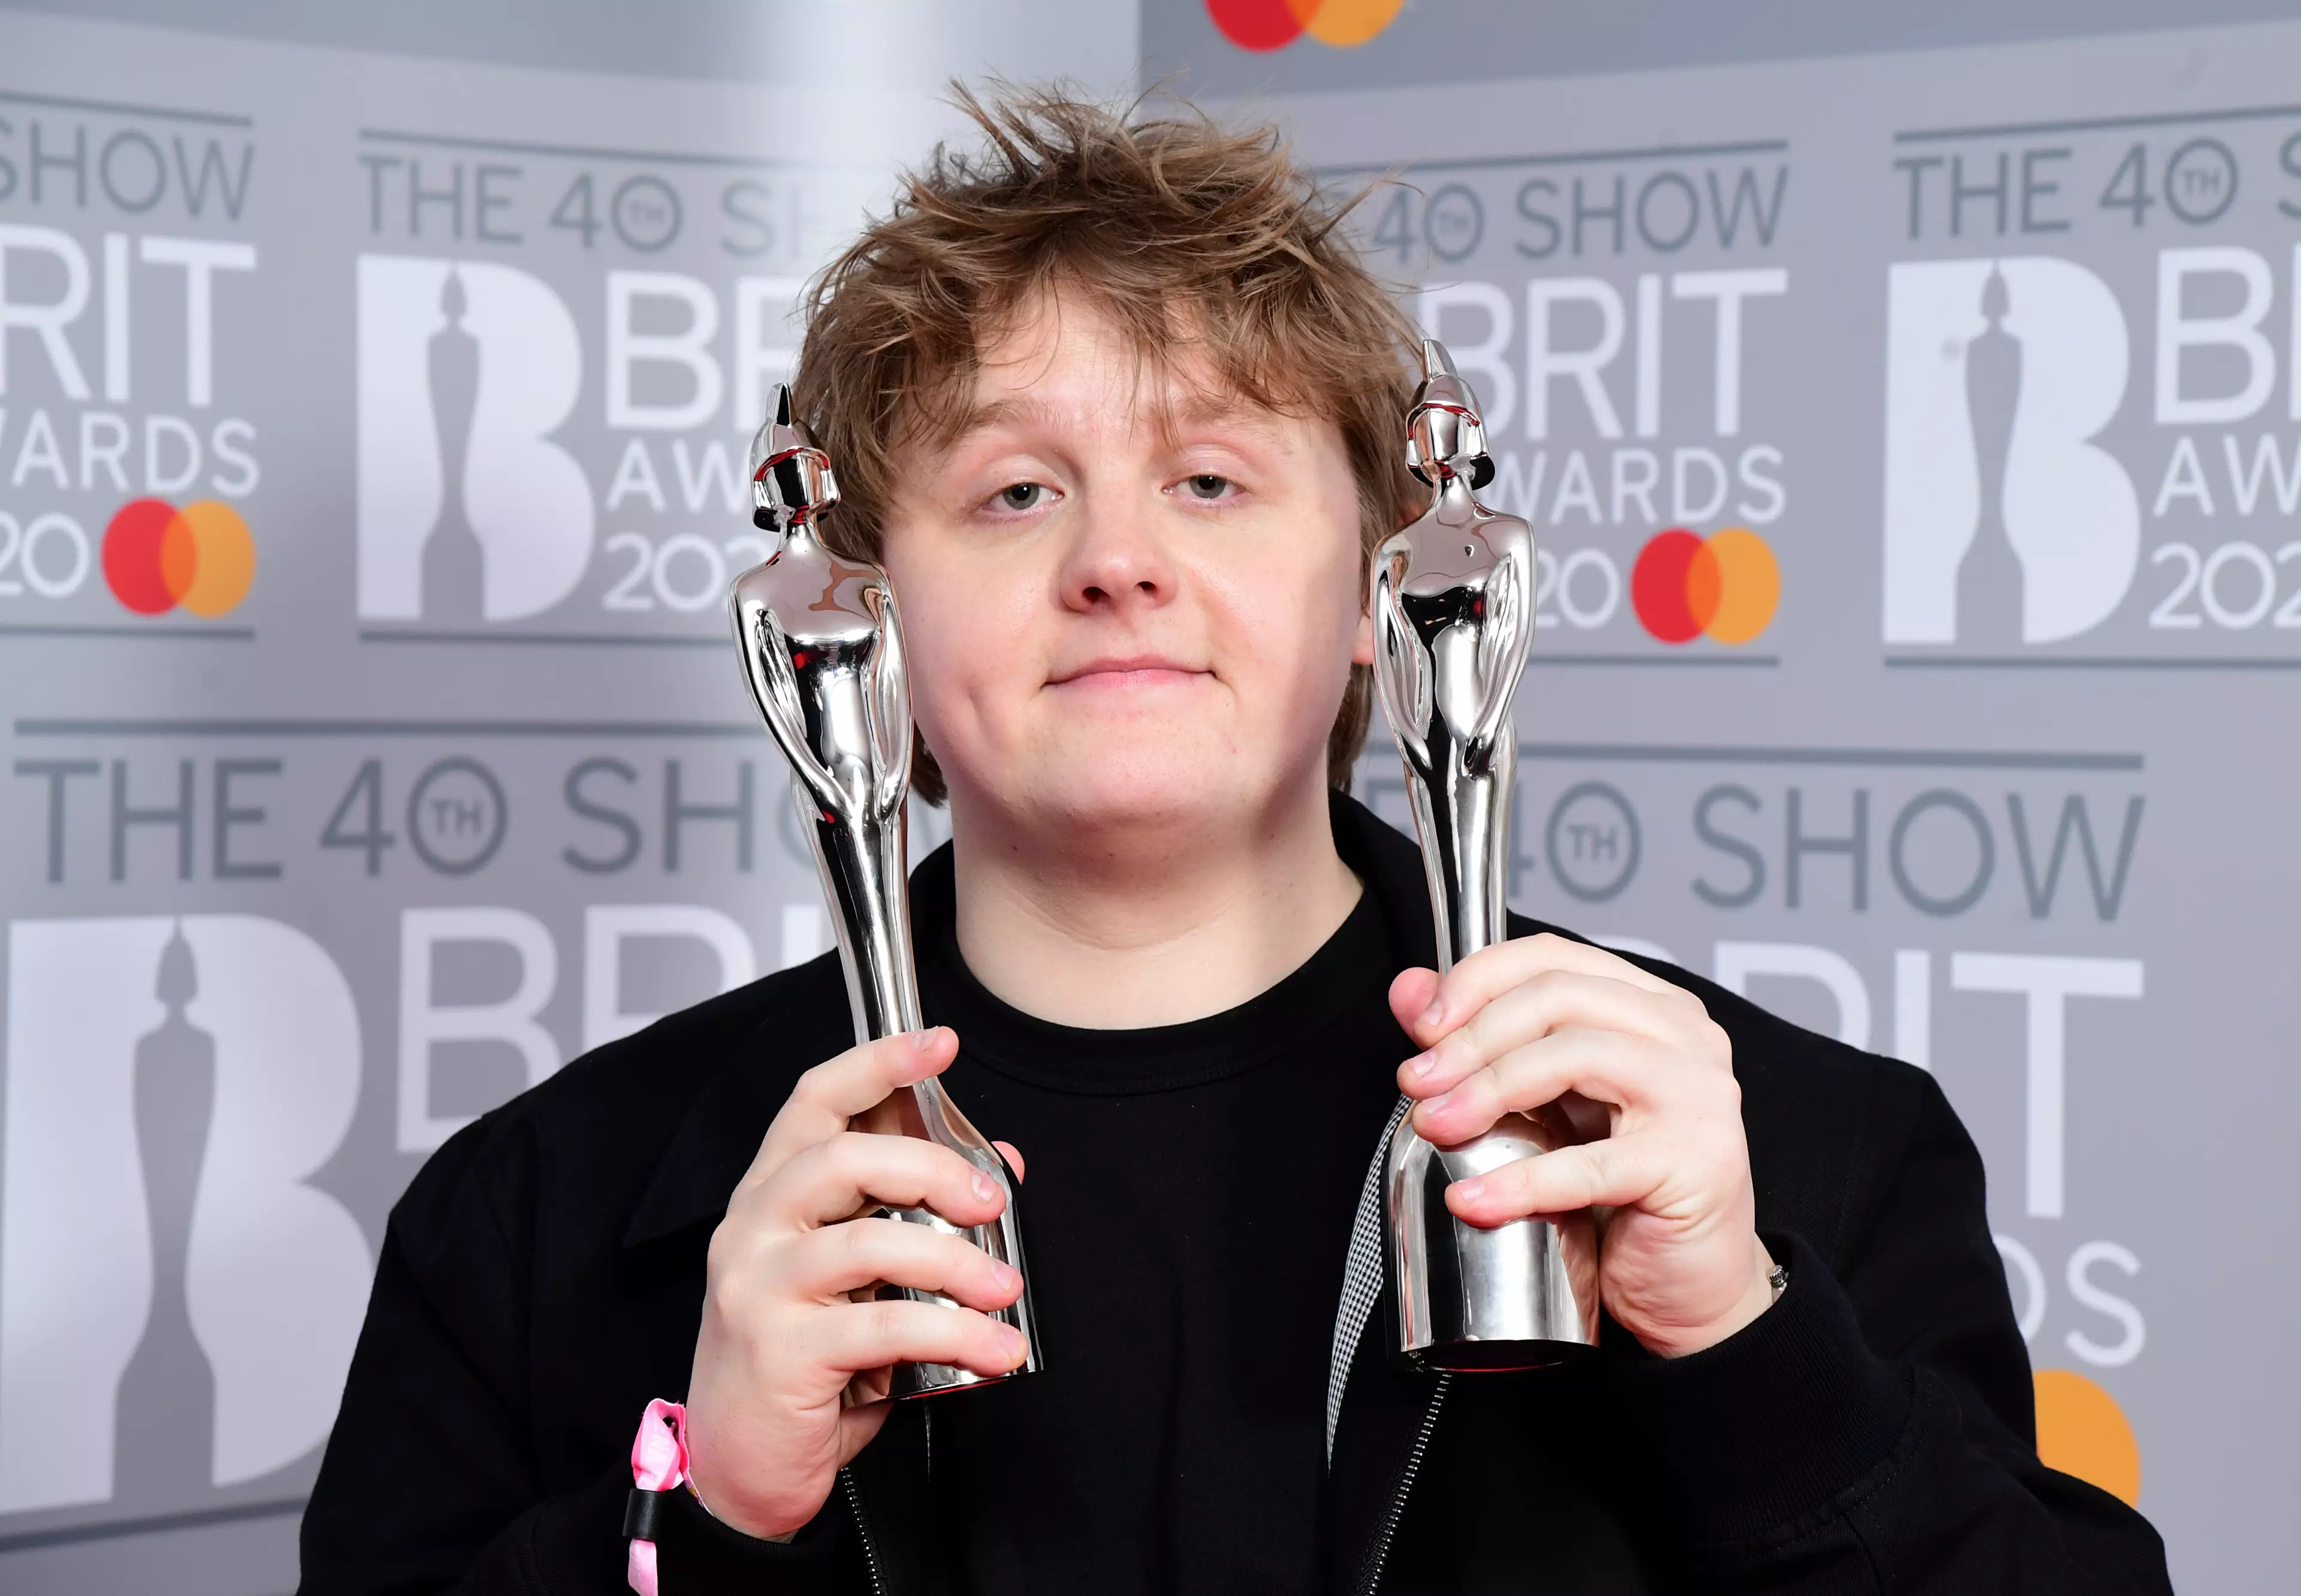 Lewis and his BRIT Awards.